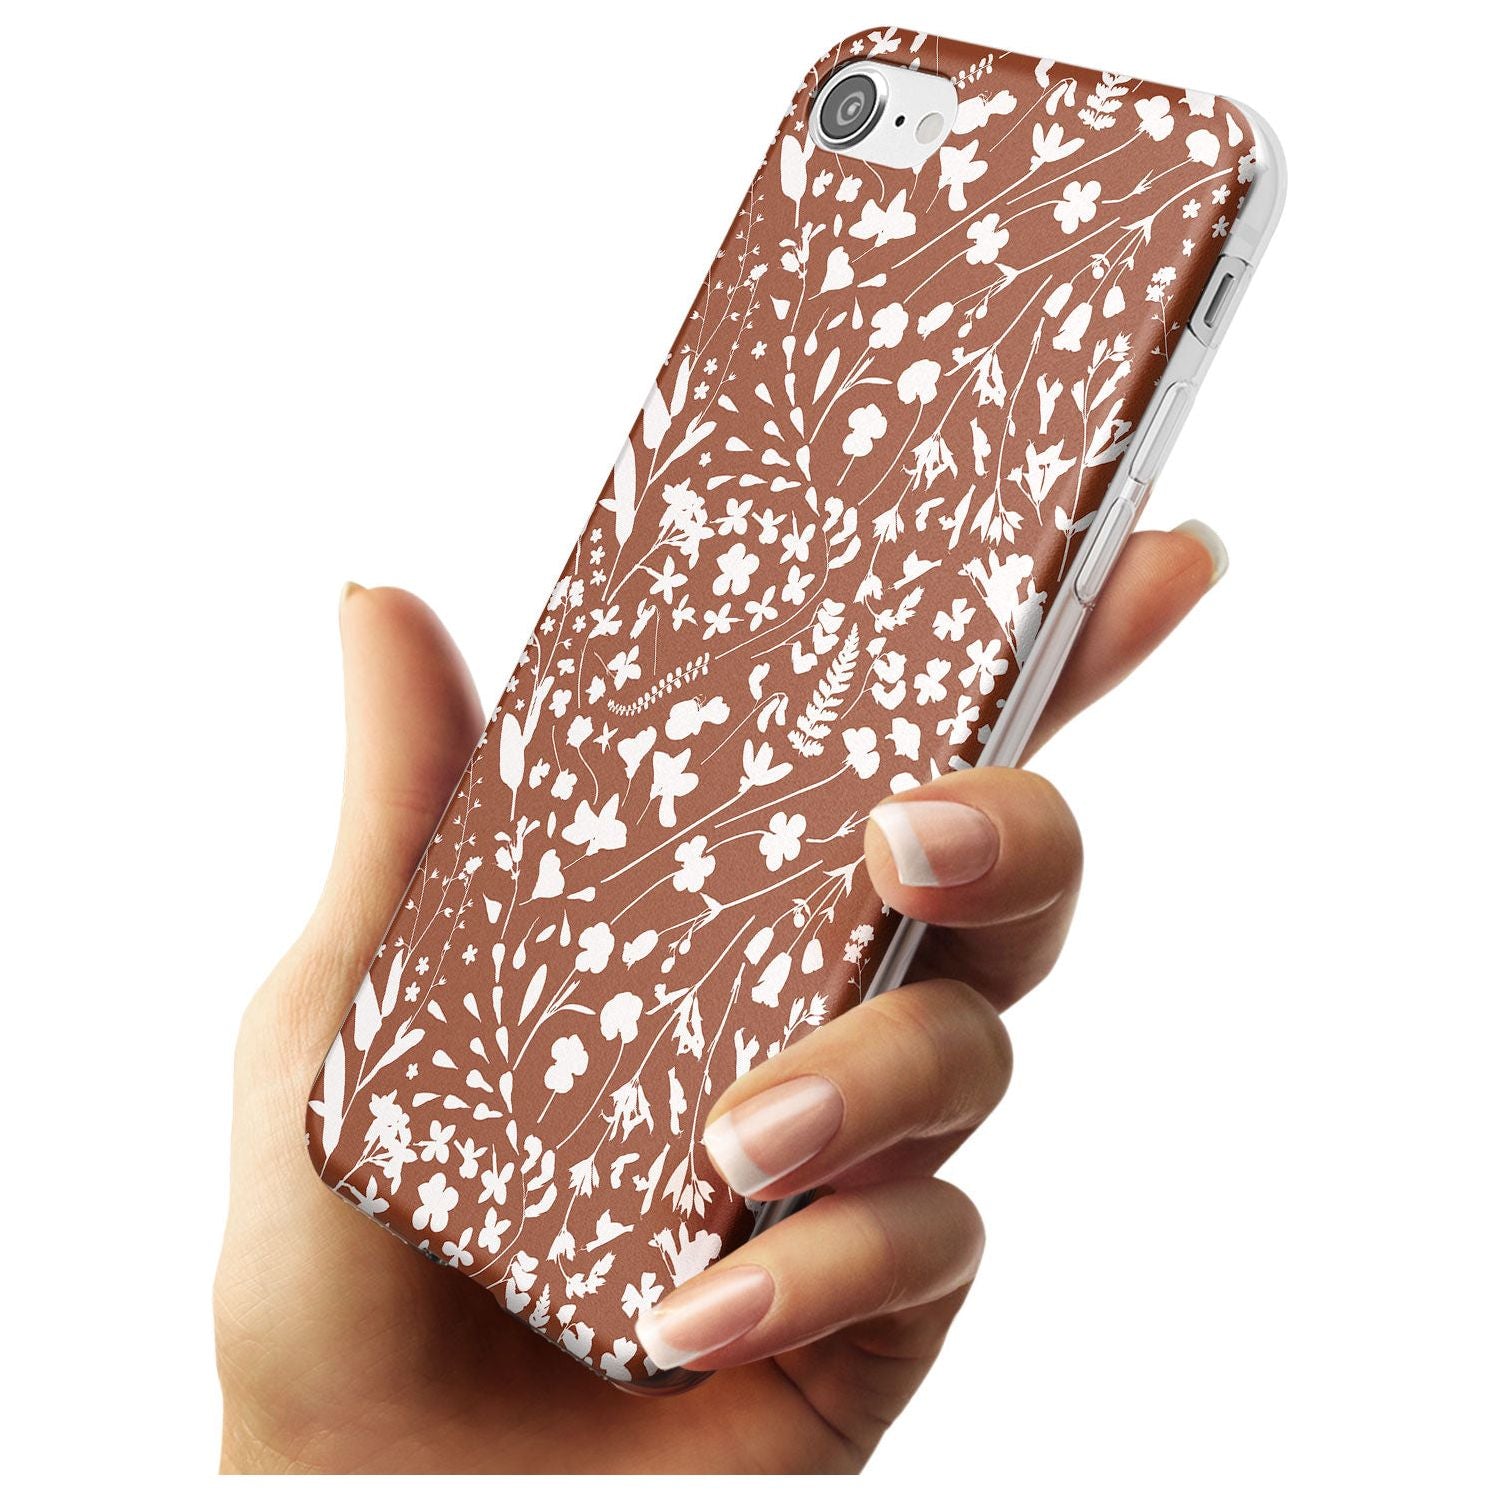 Wildflower Cluster on Terracotta Slim TPU Phone Case for iPhone SE 8 7 Plus